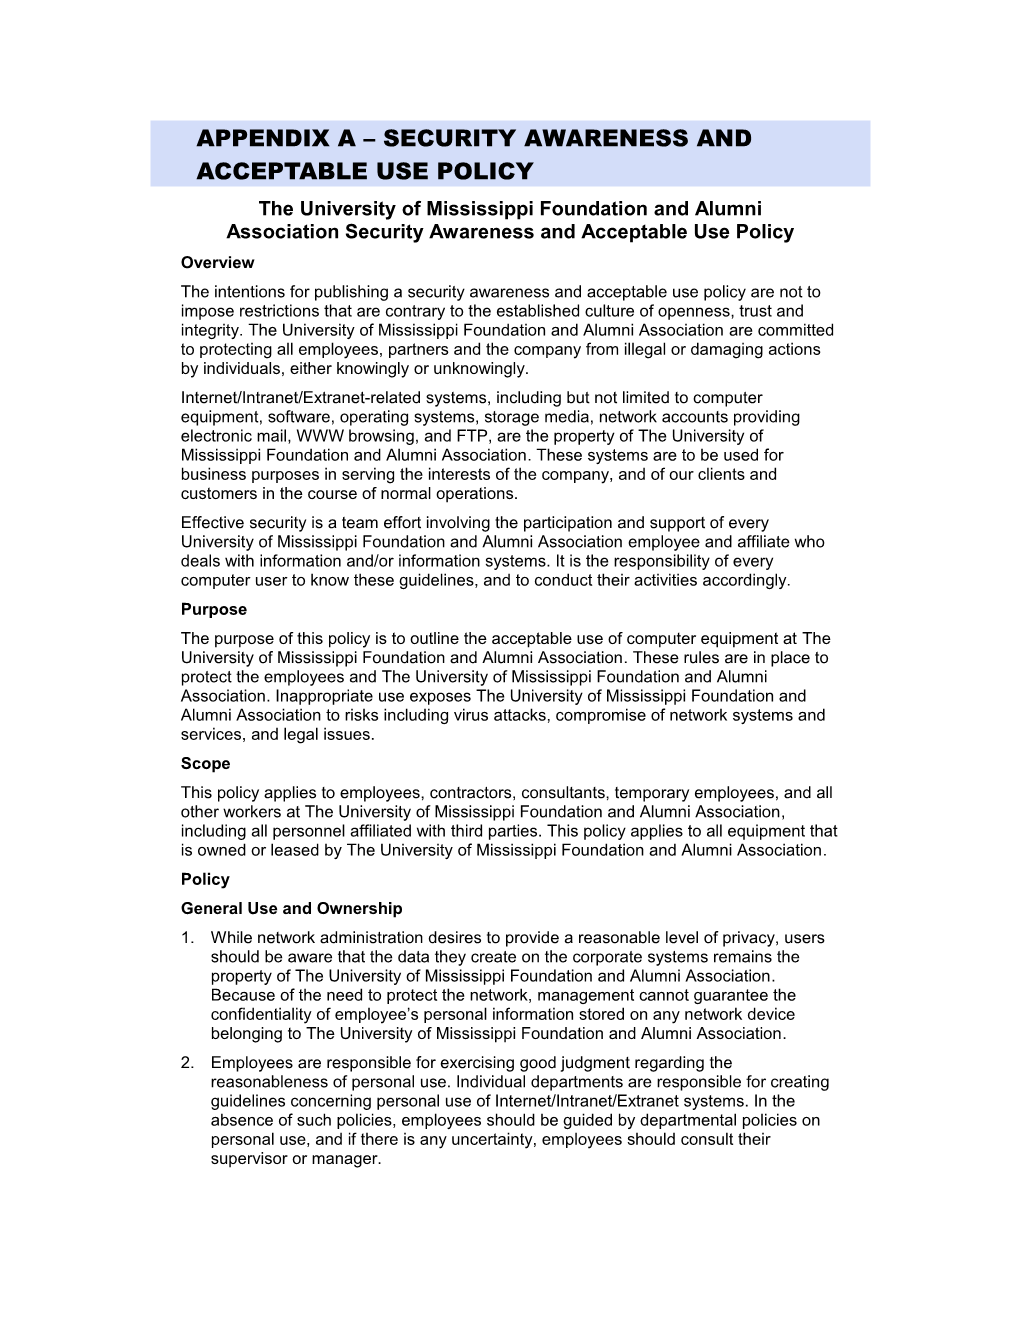 Appendix a Security Awareness and Acceptable Use Policy